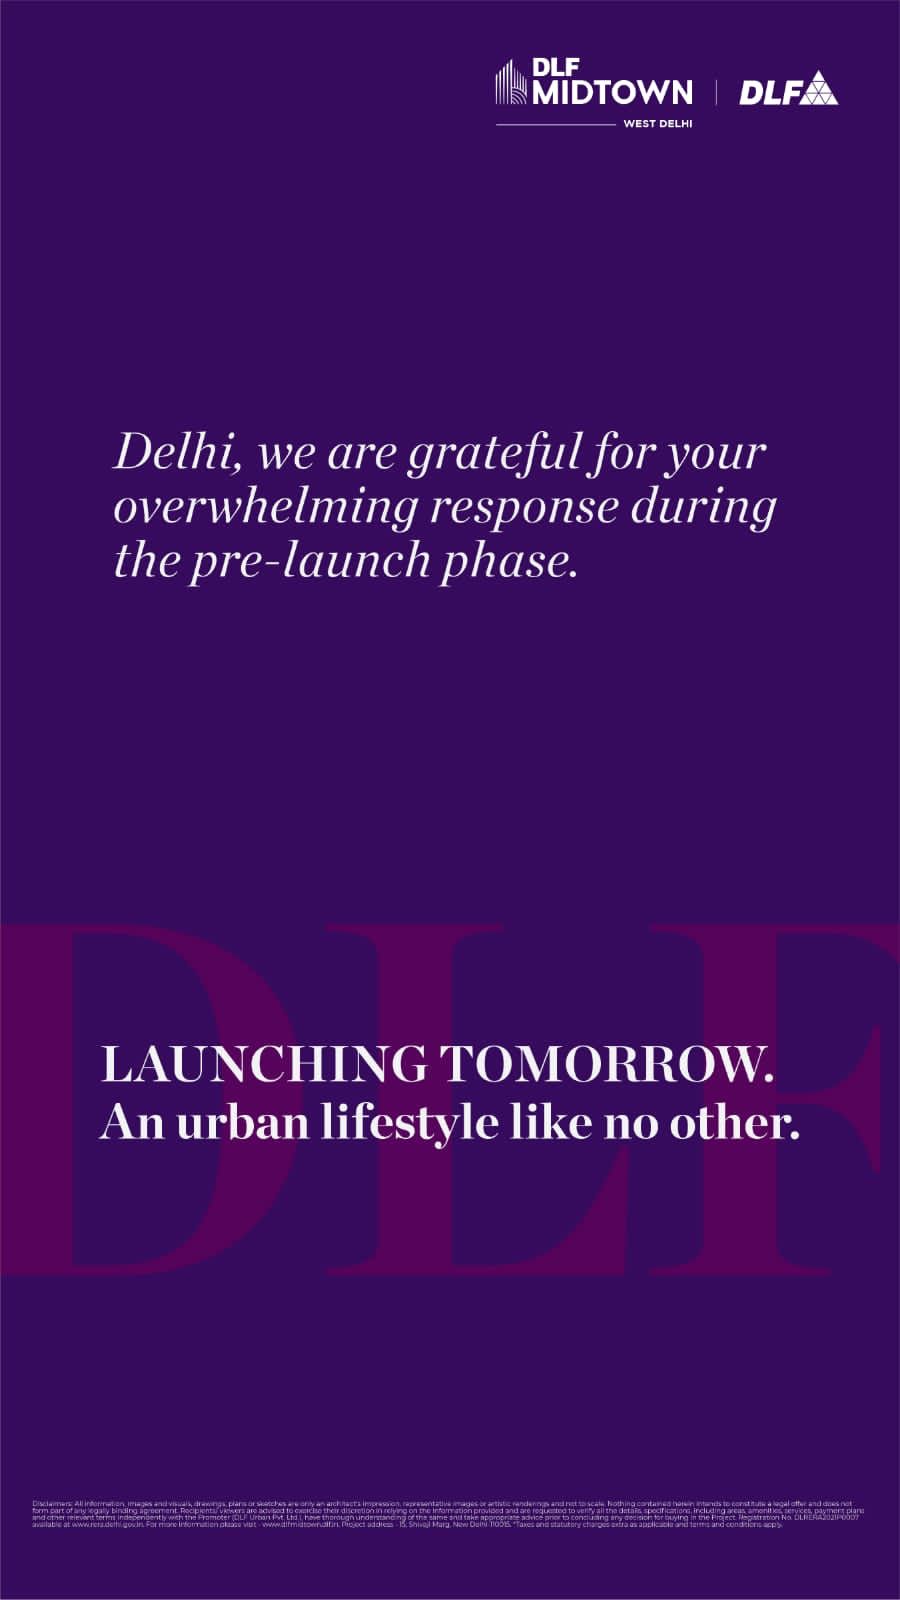 Delhi, we are grateful for your overwhelming response during the pre-launch phase at DLF One Midtown, New Delhi